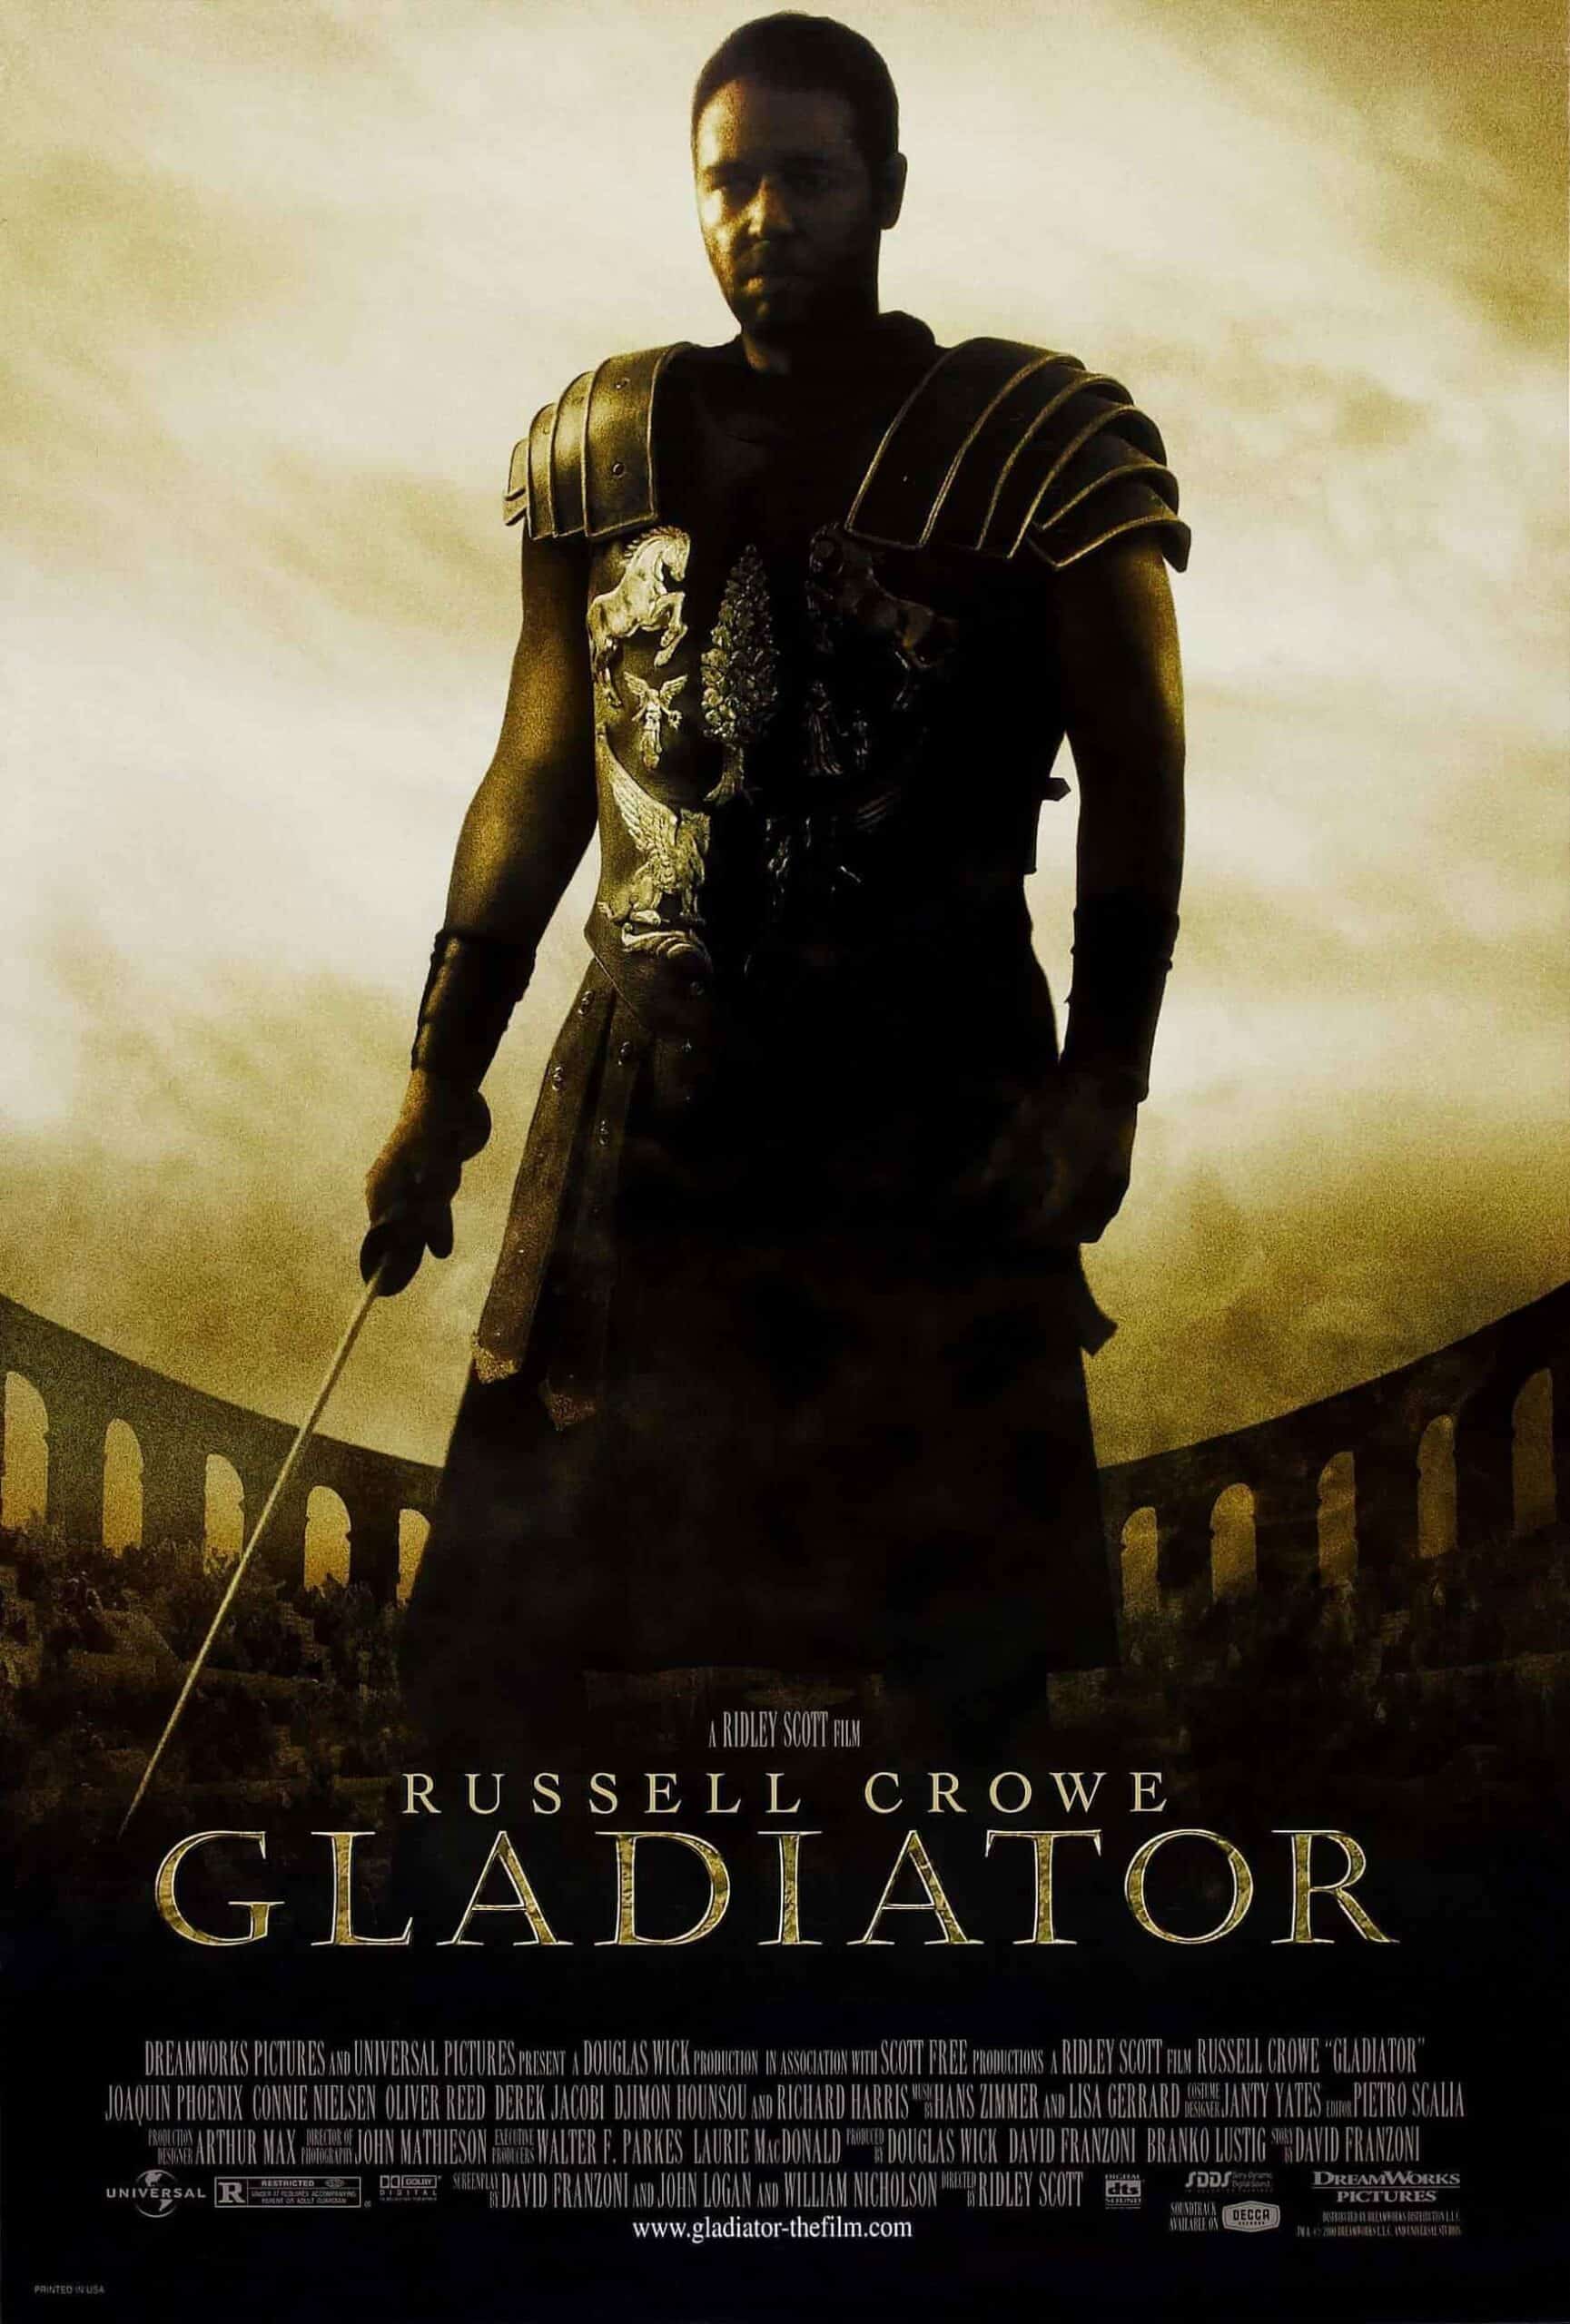 Gladiator (2000) Best Movies About Rome to Watch and Re-Watch